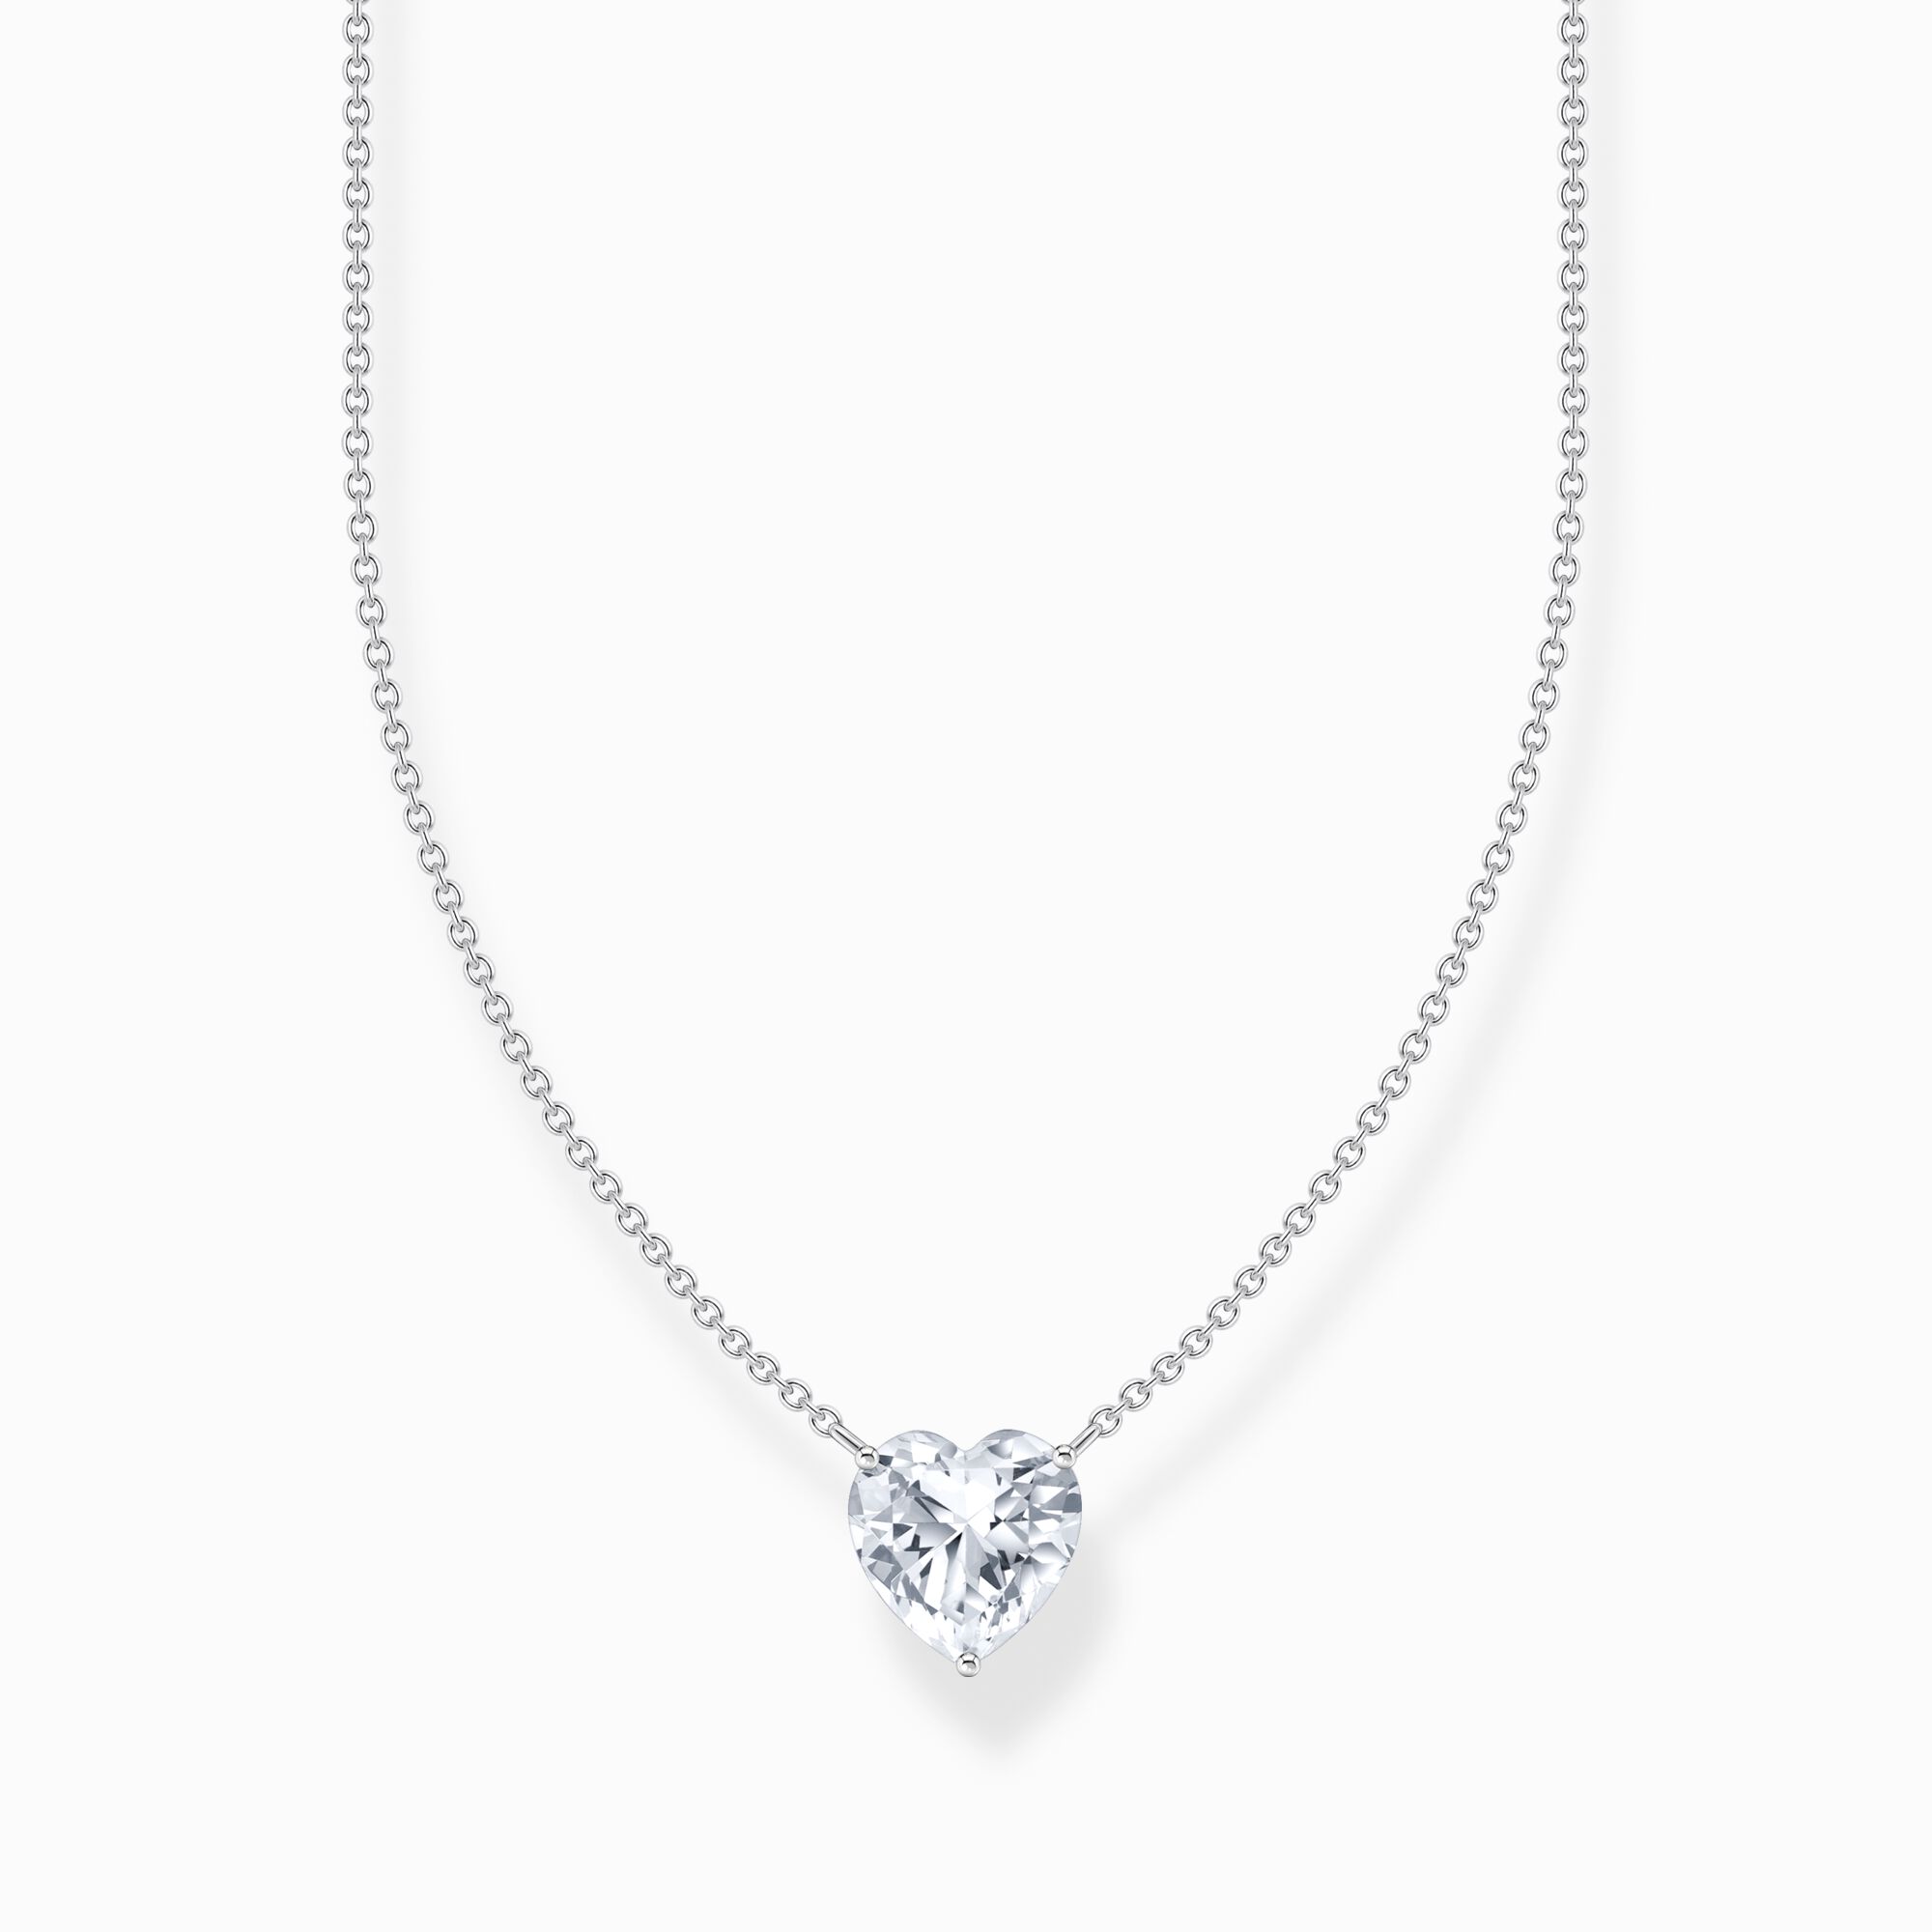 Silver necklace with white heart-shaped pendant from the  collection in the THOMAS SABO online store